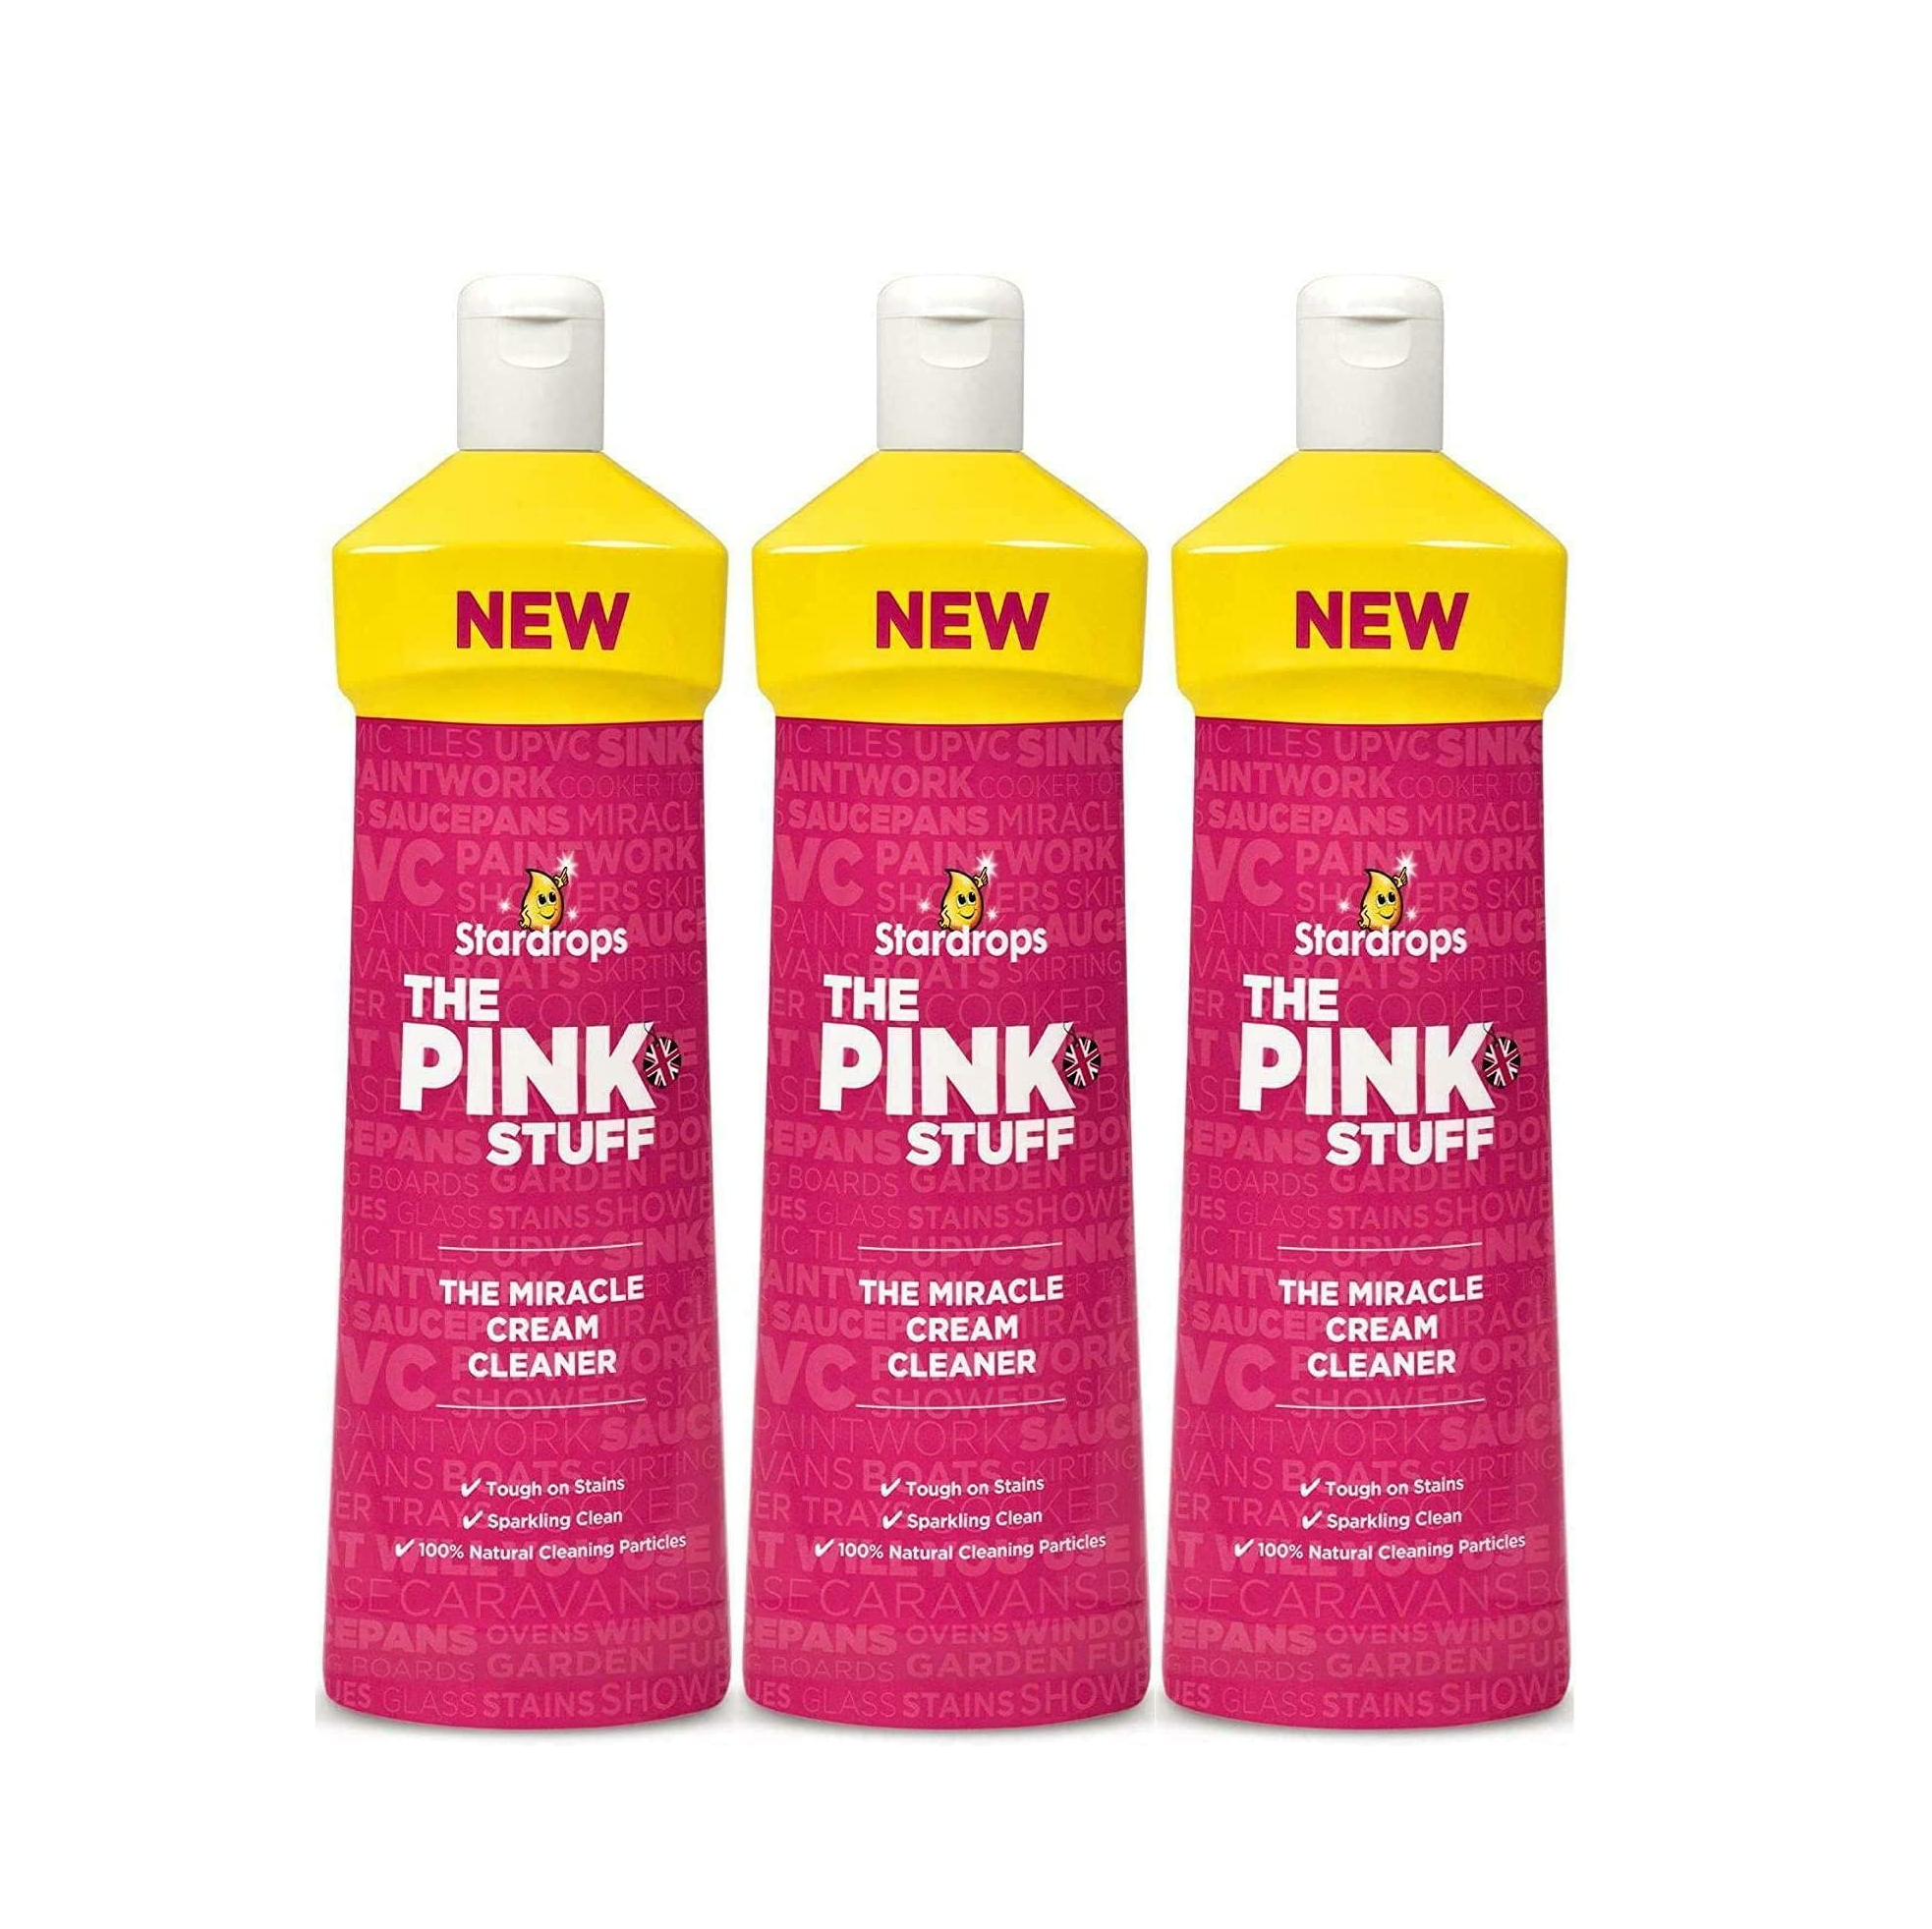 The Pink Stuff Stardrops The Miracle Cream Cleaner 500ml Pack of 2